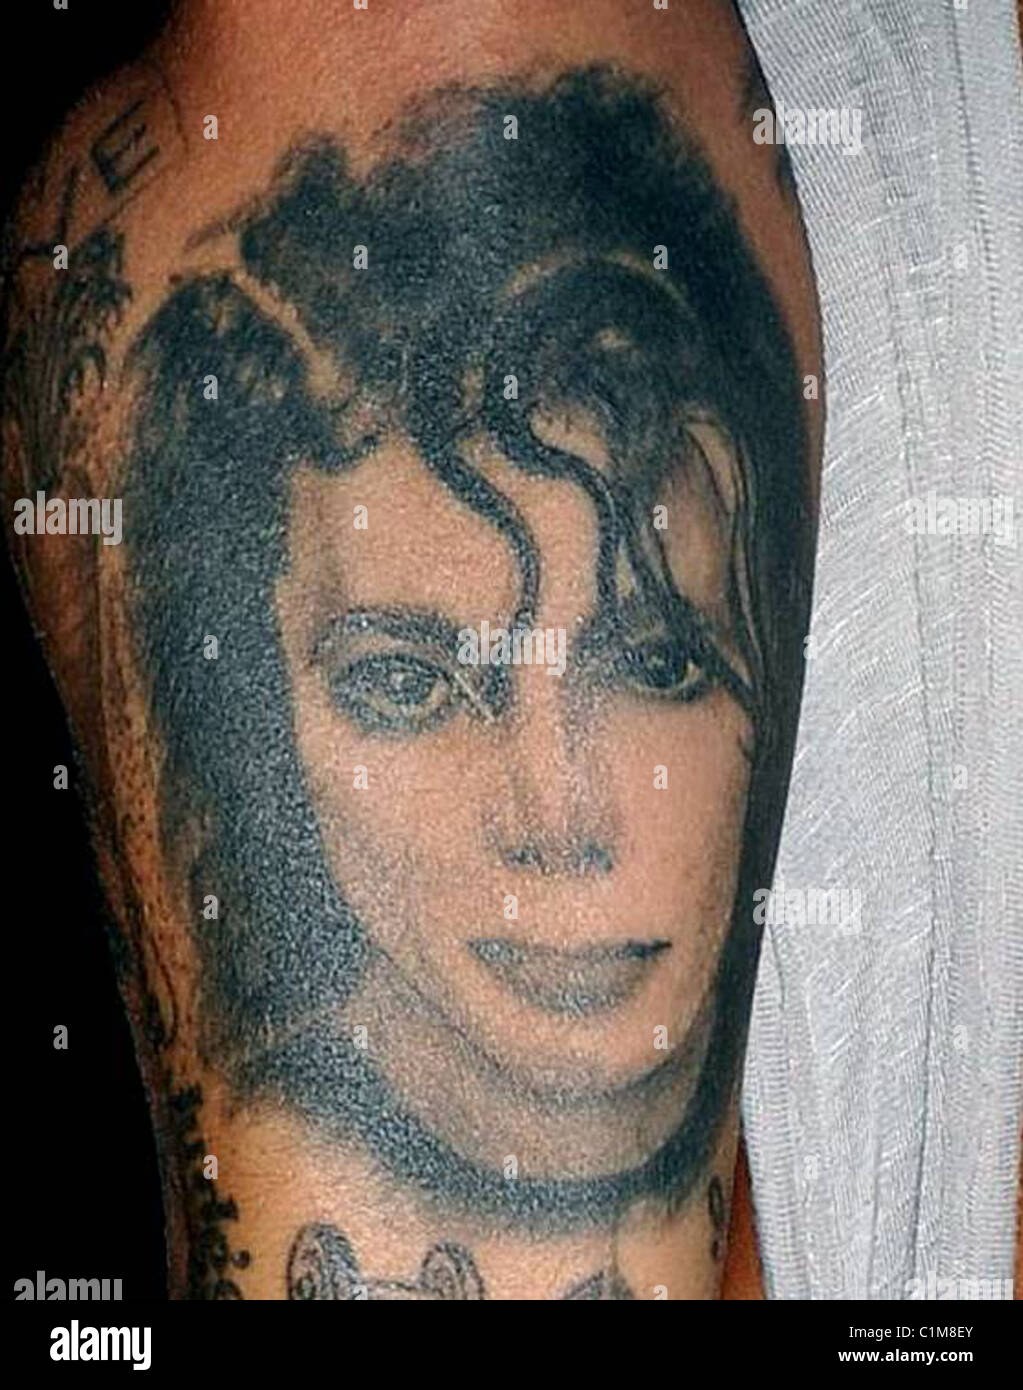 Michael Jackson was totally bald and had secret tattoos and scars all  over his body at time of death Cops  MEAWW